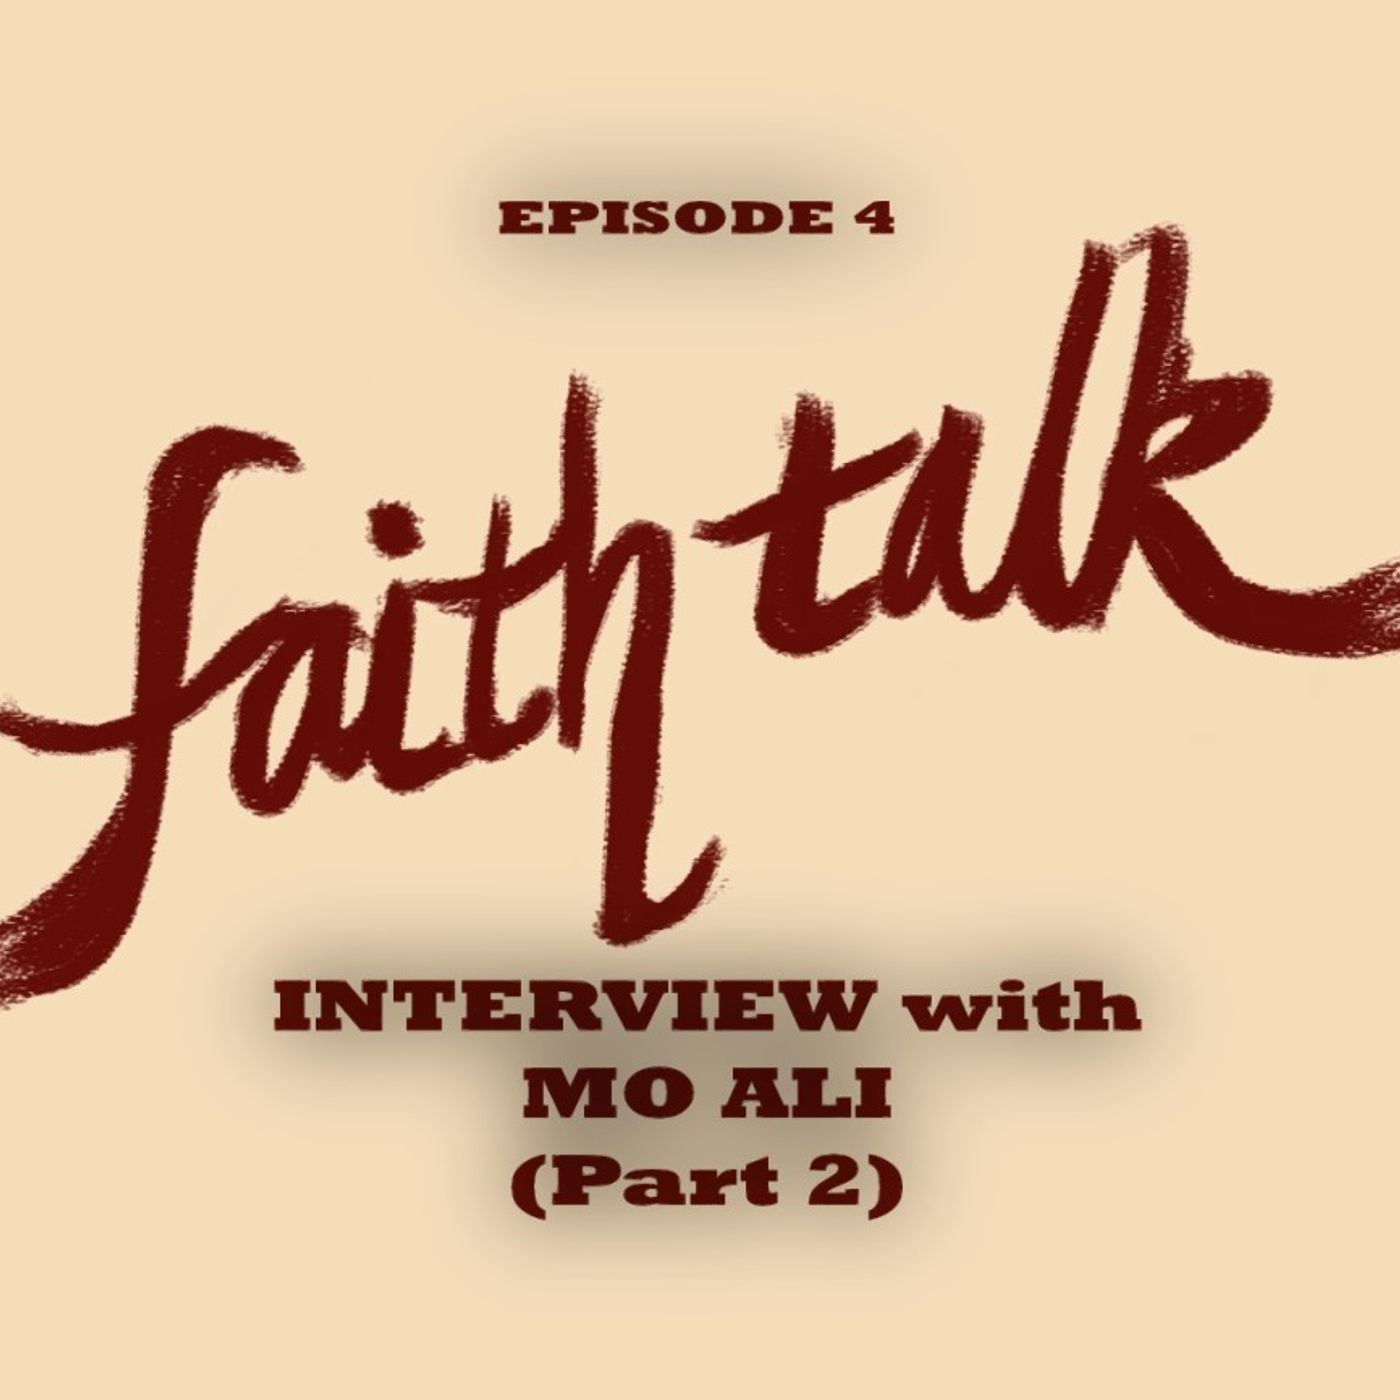 Episode 4 - Interview with Mo Ali (Part 2)